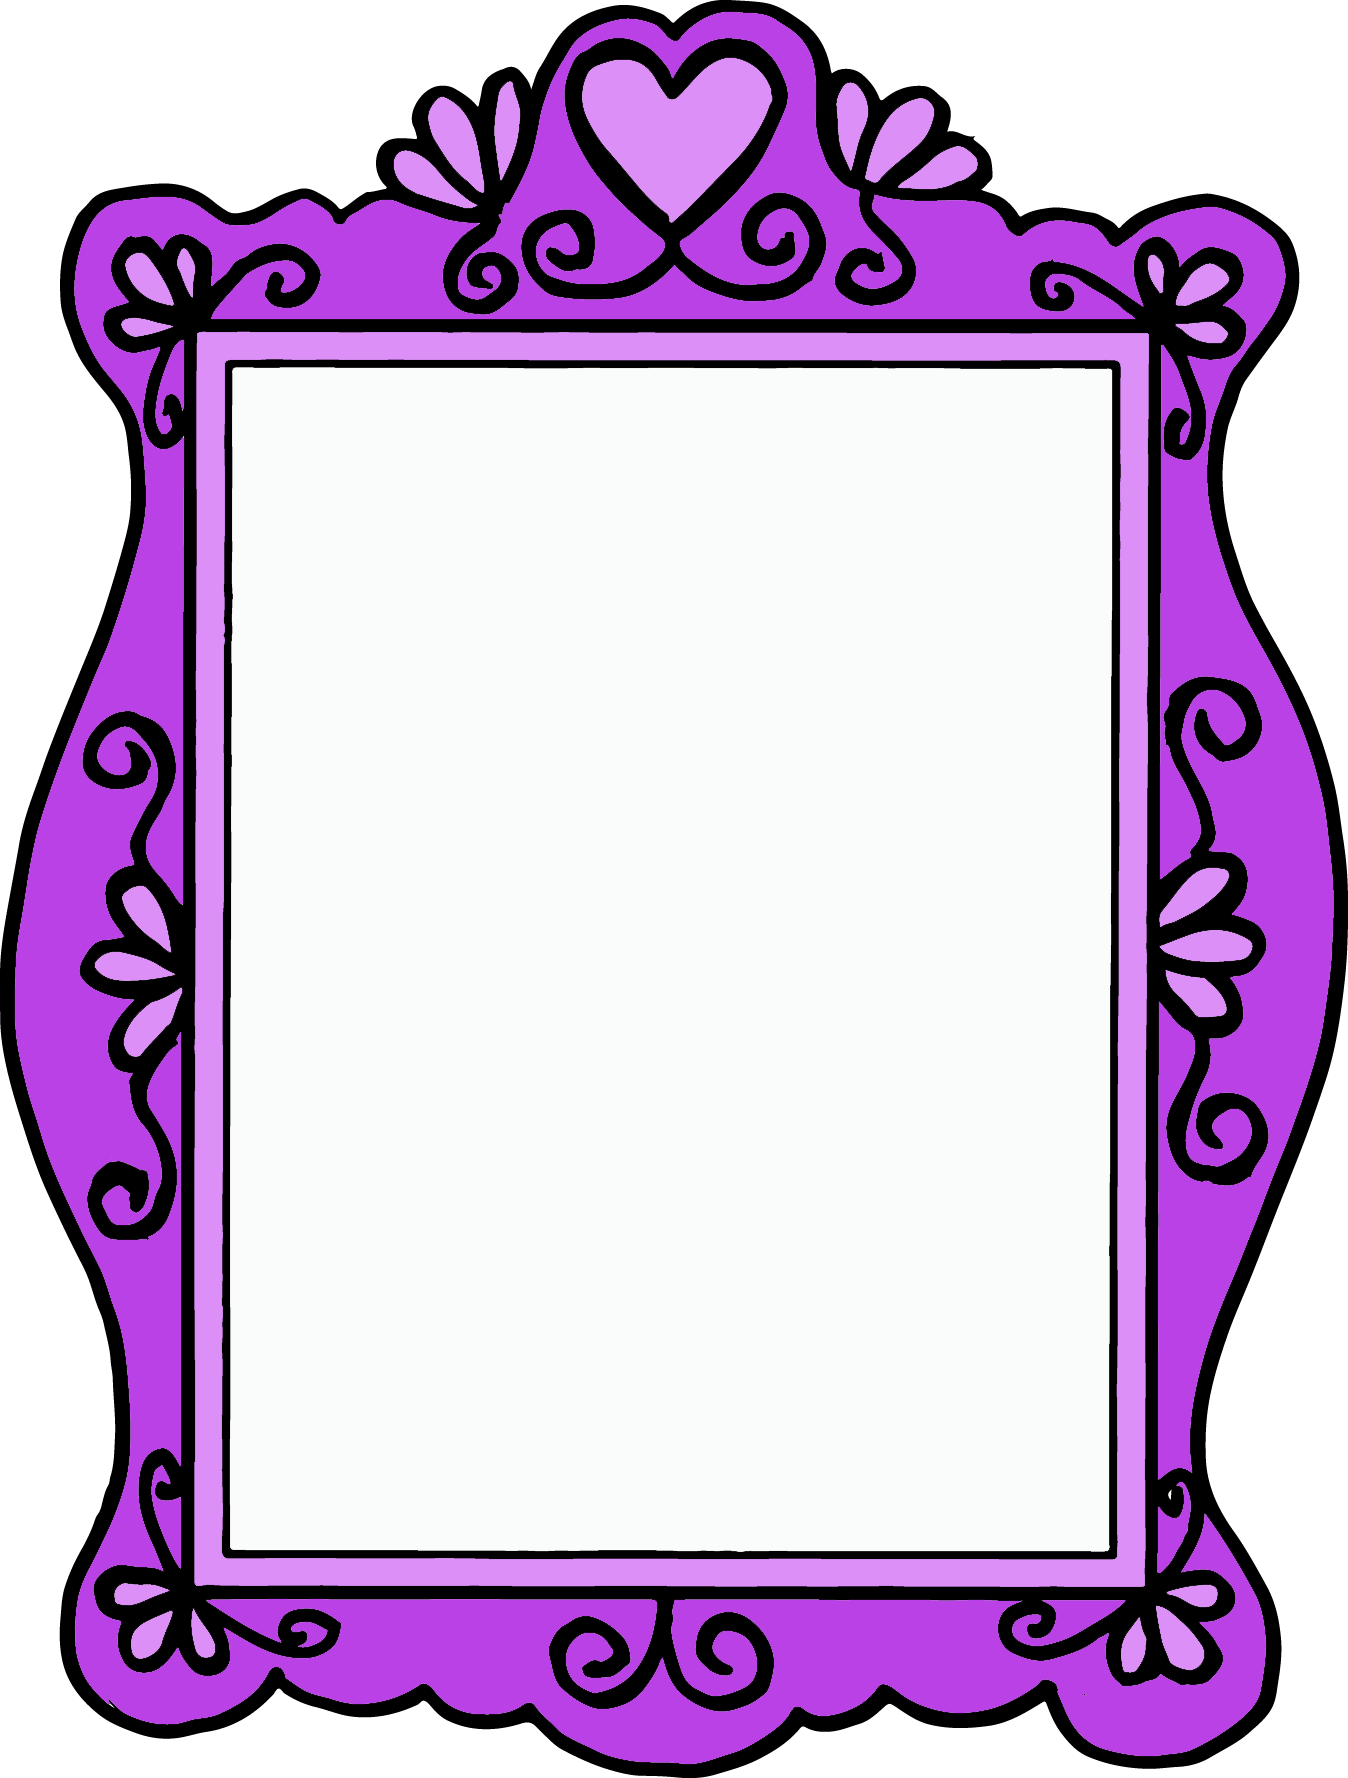 1348 X 1778 1 - Picture Frame (1348x1778)